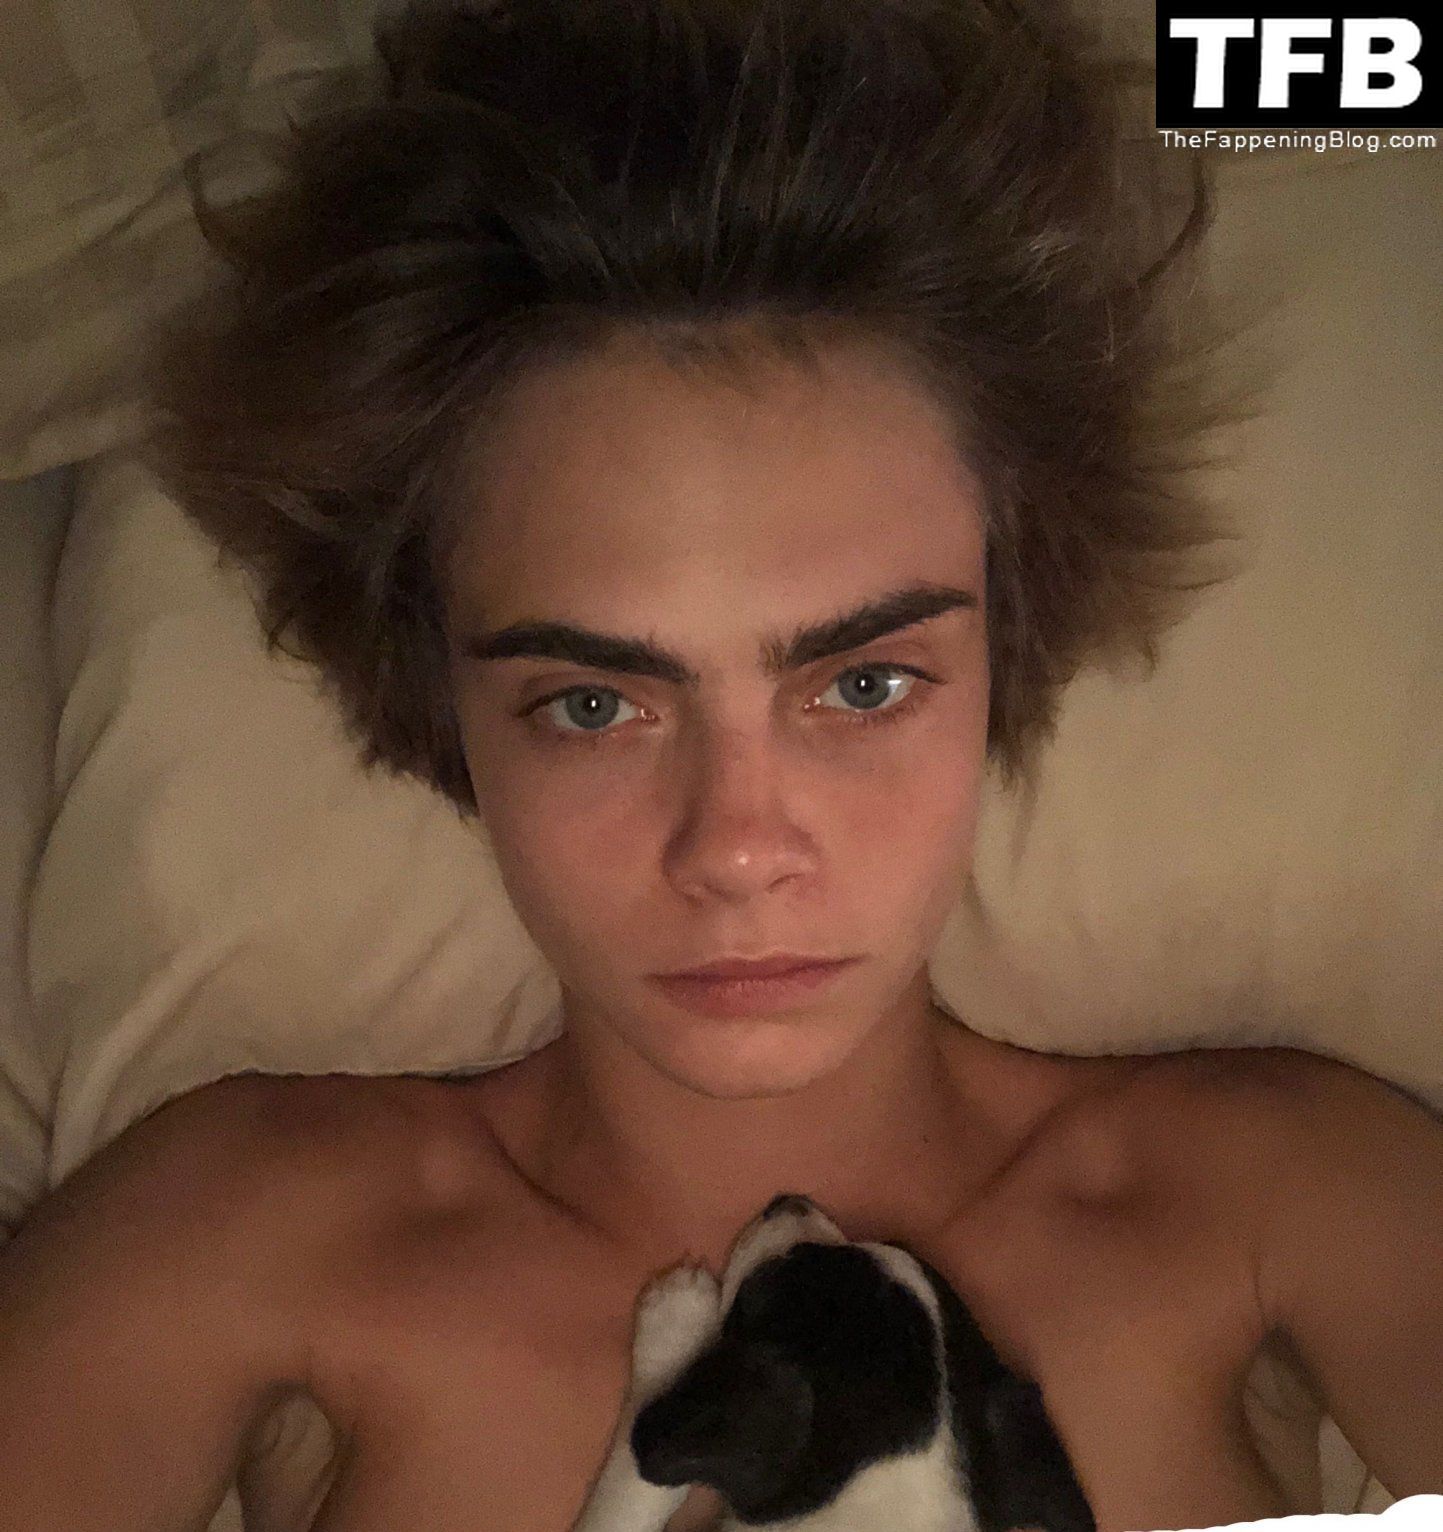 Cara Delevingne Nude Leaked The Fappening (1 Preview Pic)